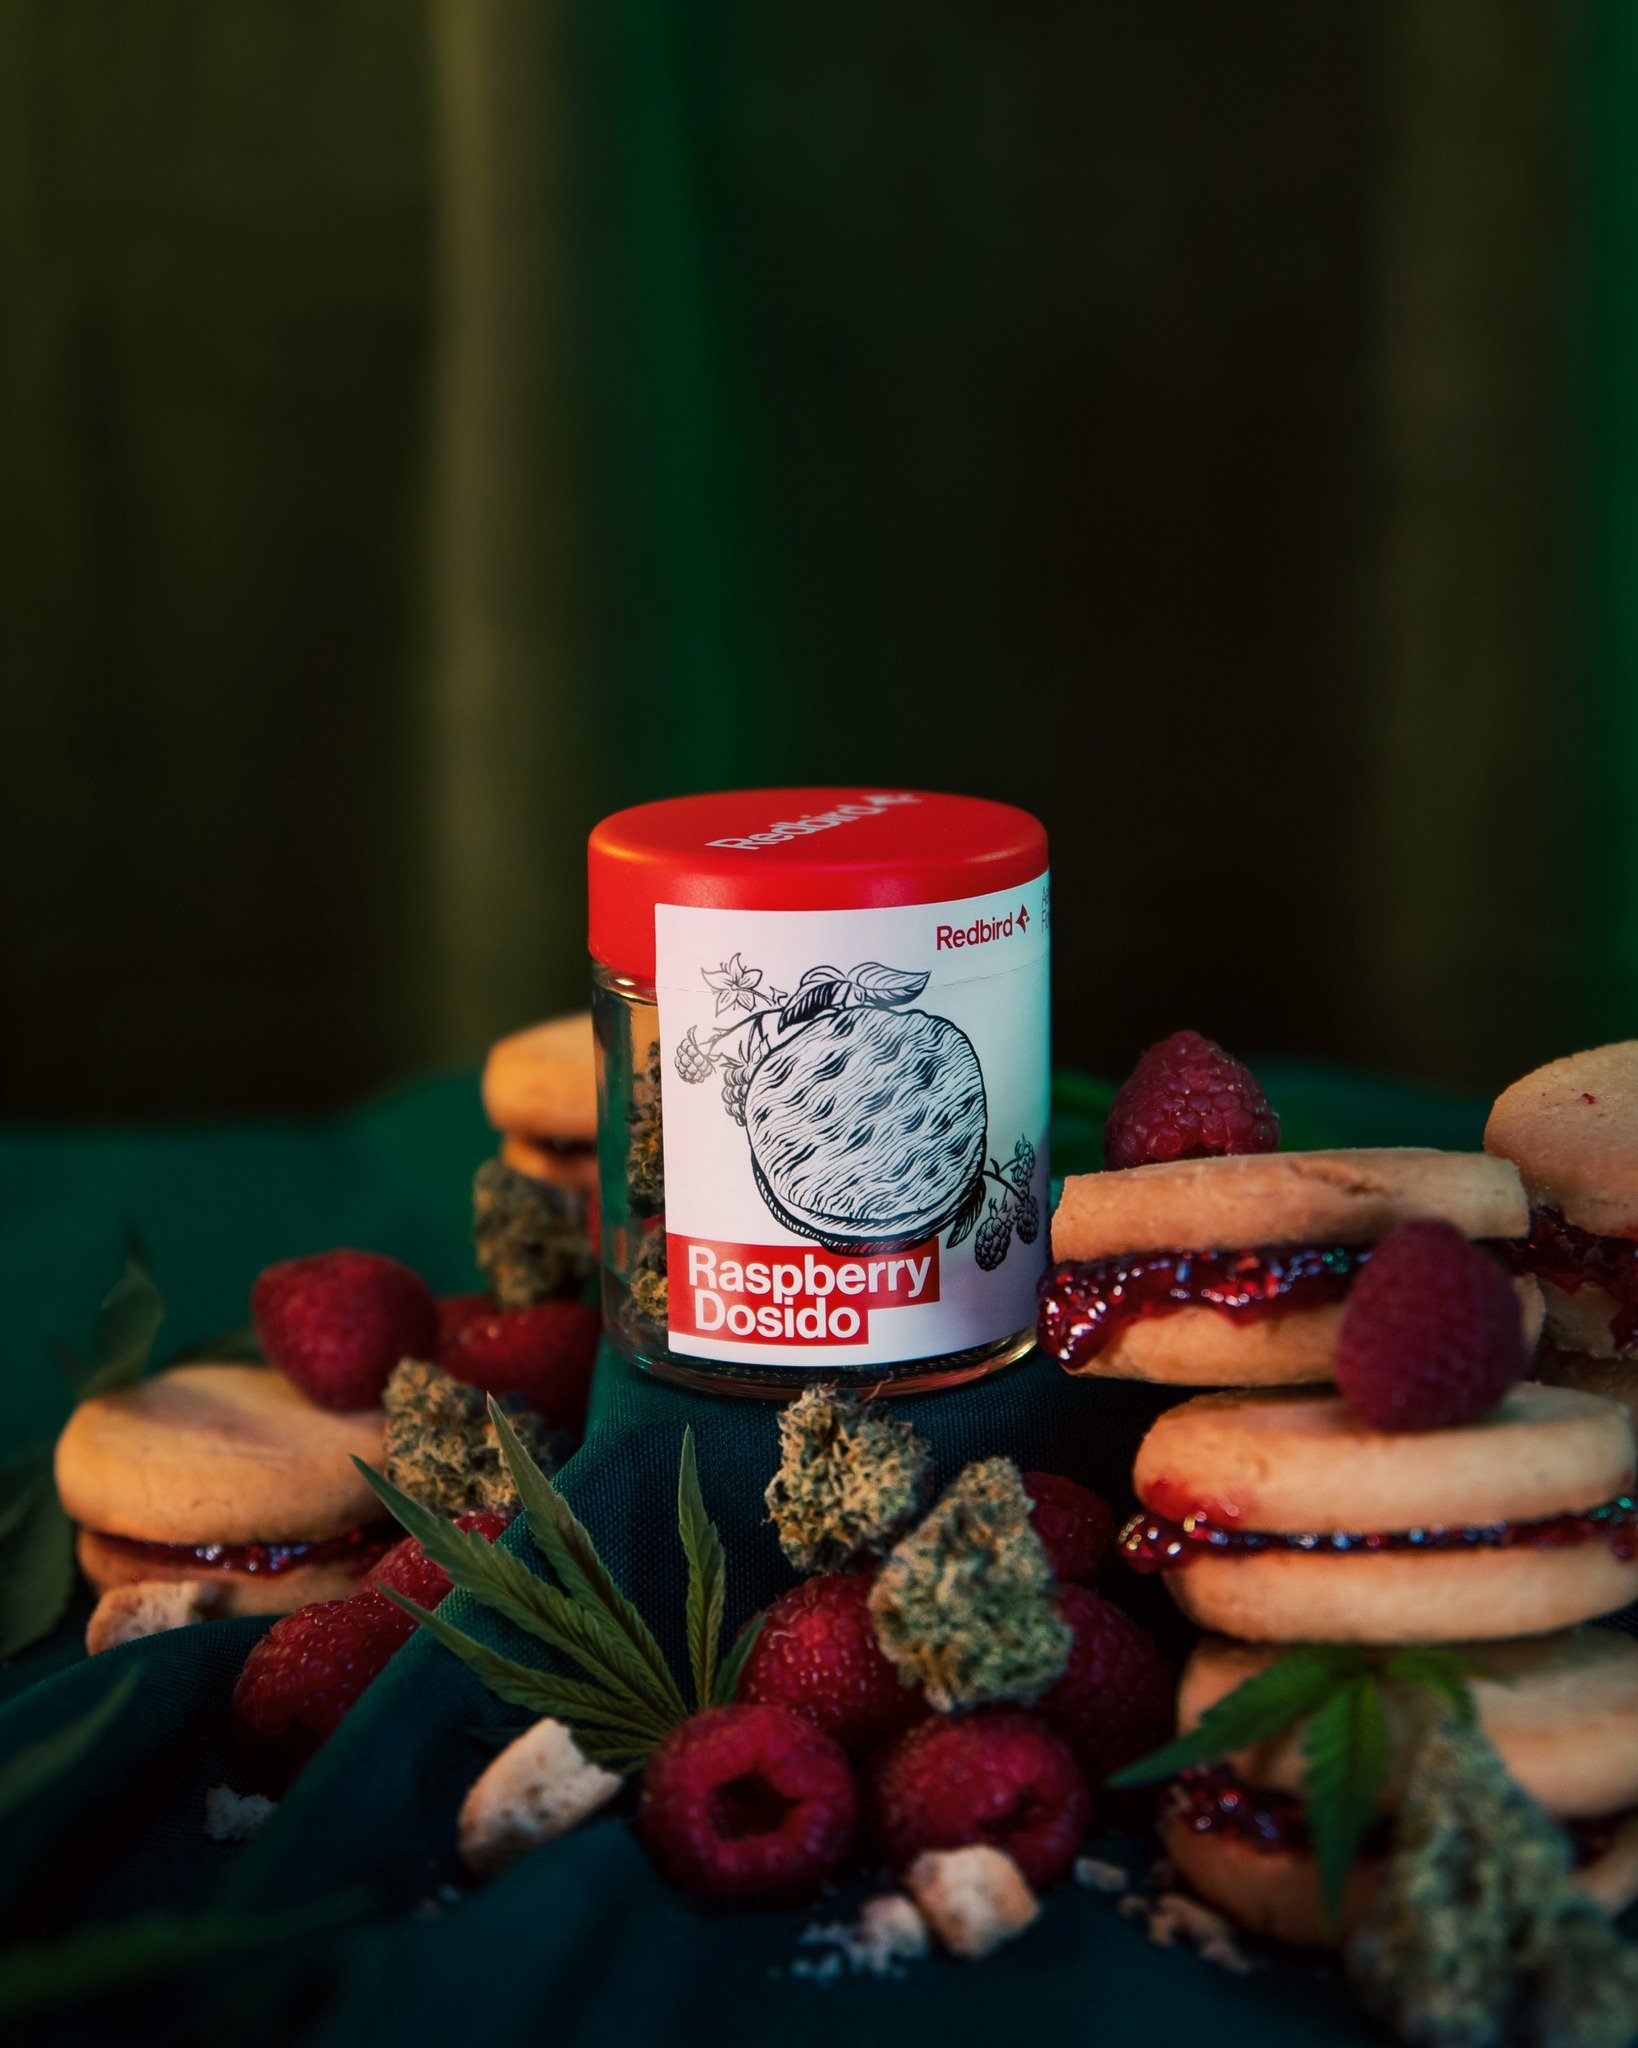 It's always cookie season here and we have the thing for you: RASPBERRY DOSIDO, an indica-dominant hybrid cross of popular DO-SI-DO x Pink Champagne.

***This product has intoxicating effects and may be habit forming. Marijuana can impair concentrati